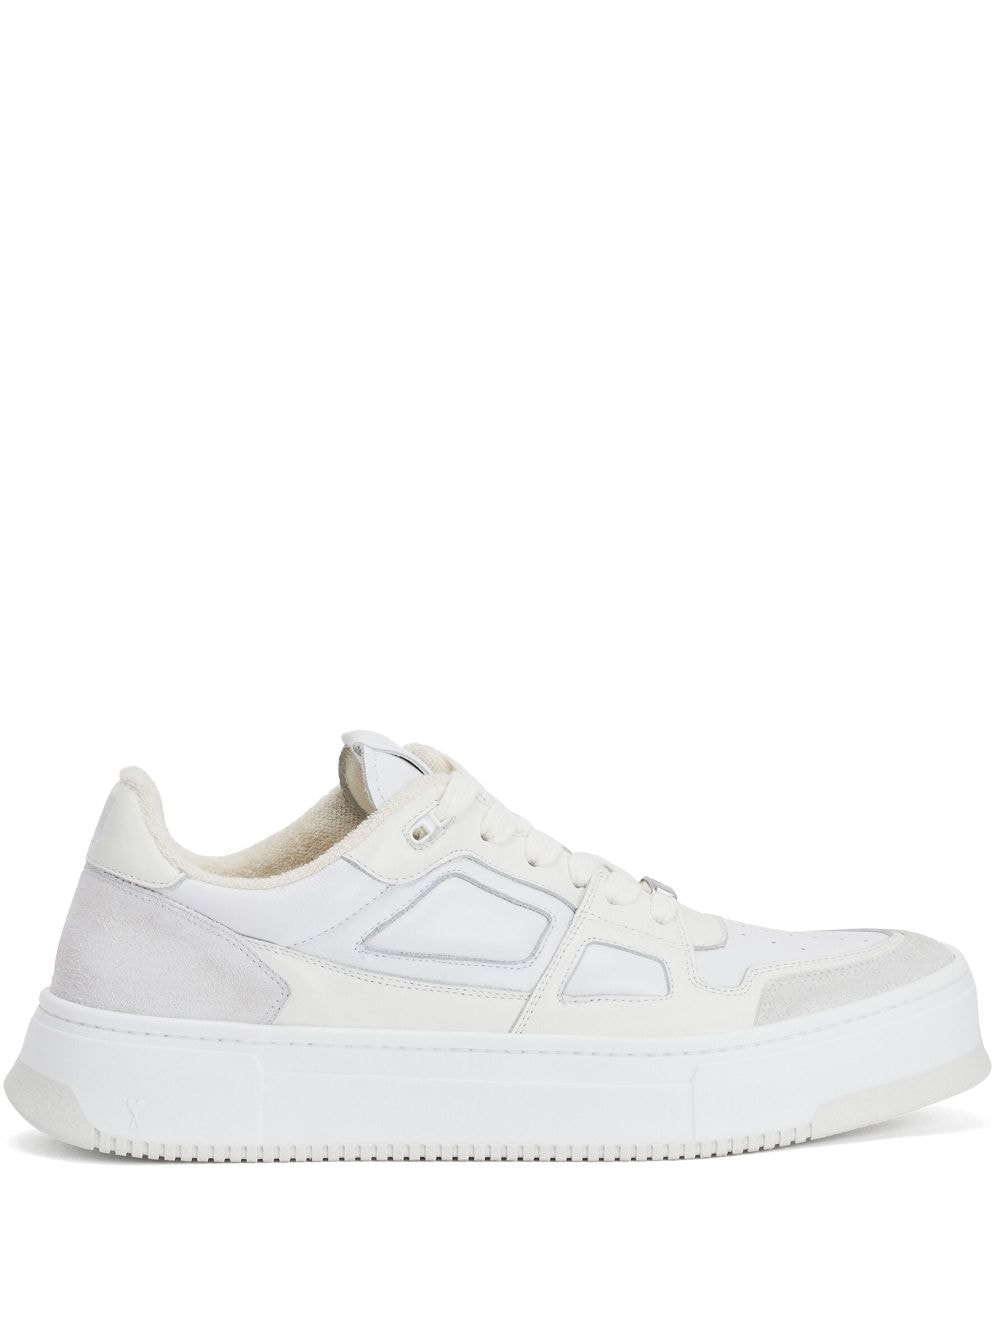 Ami Alexandre Mattiussi Lace-up Low-top Sneakers In Bianco